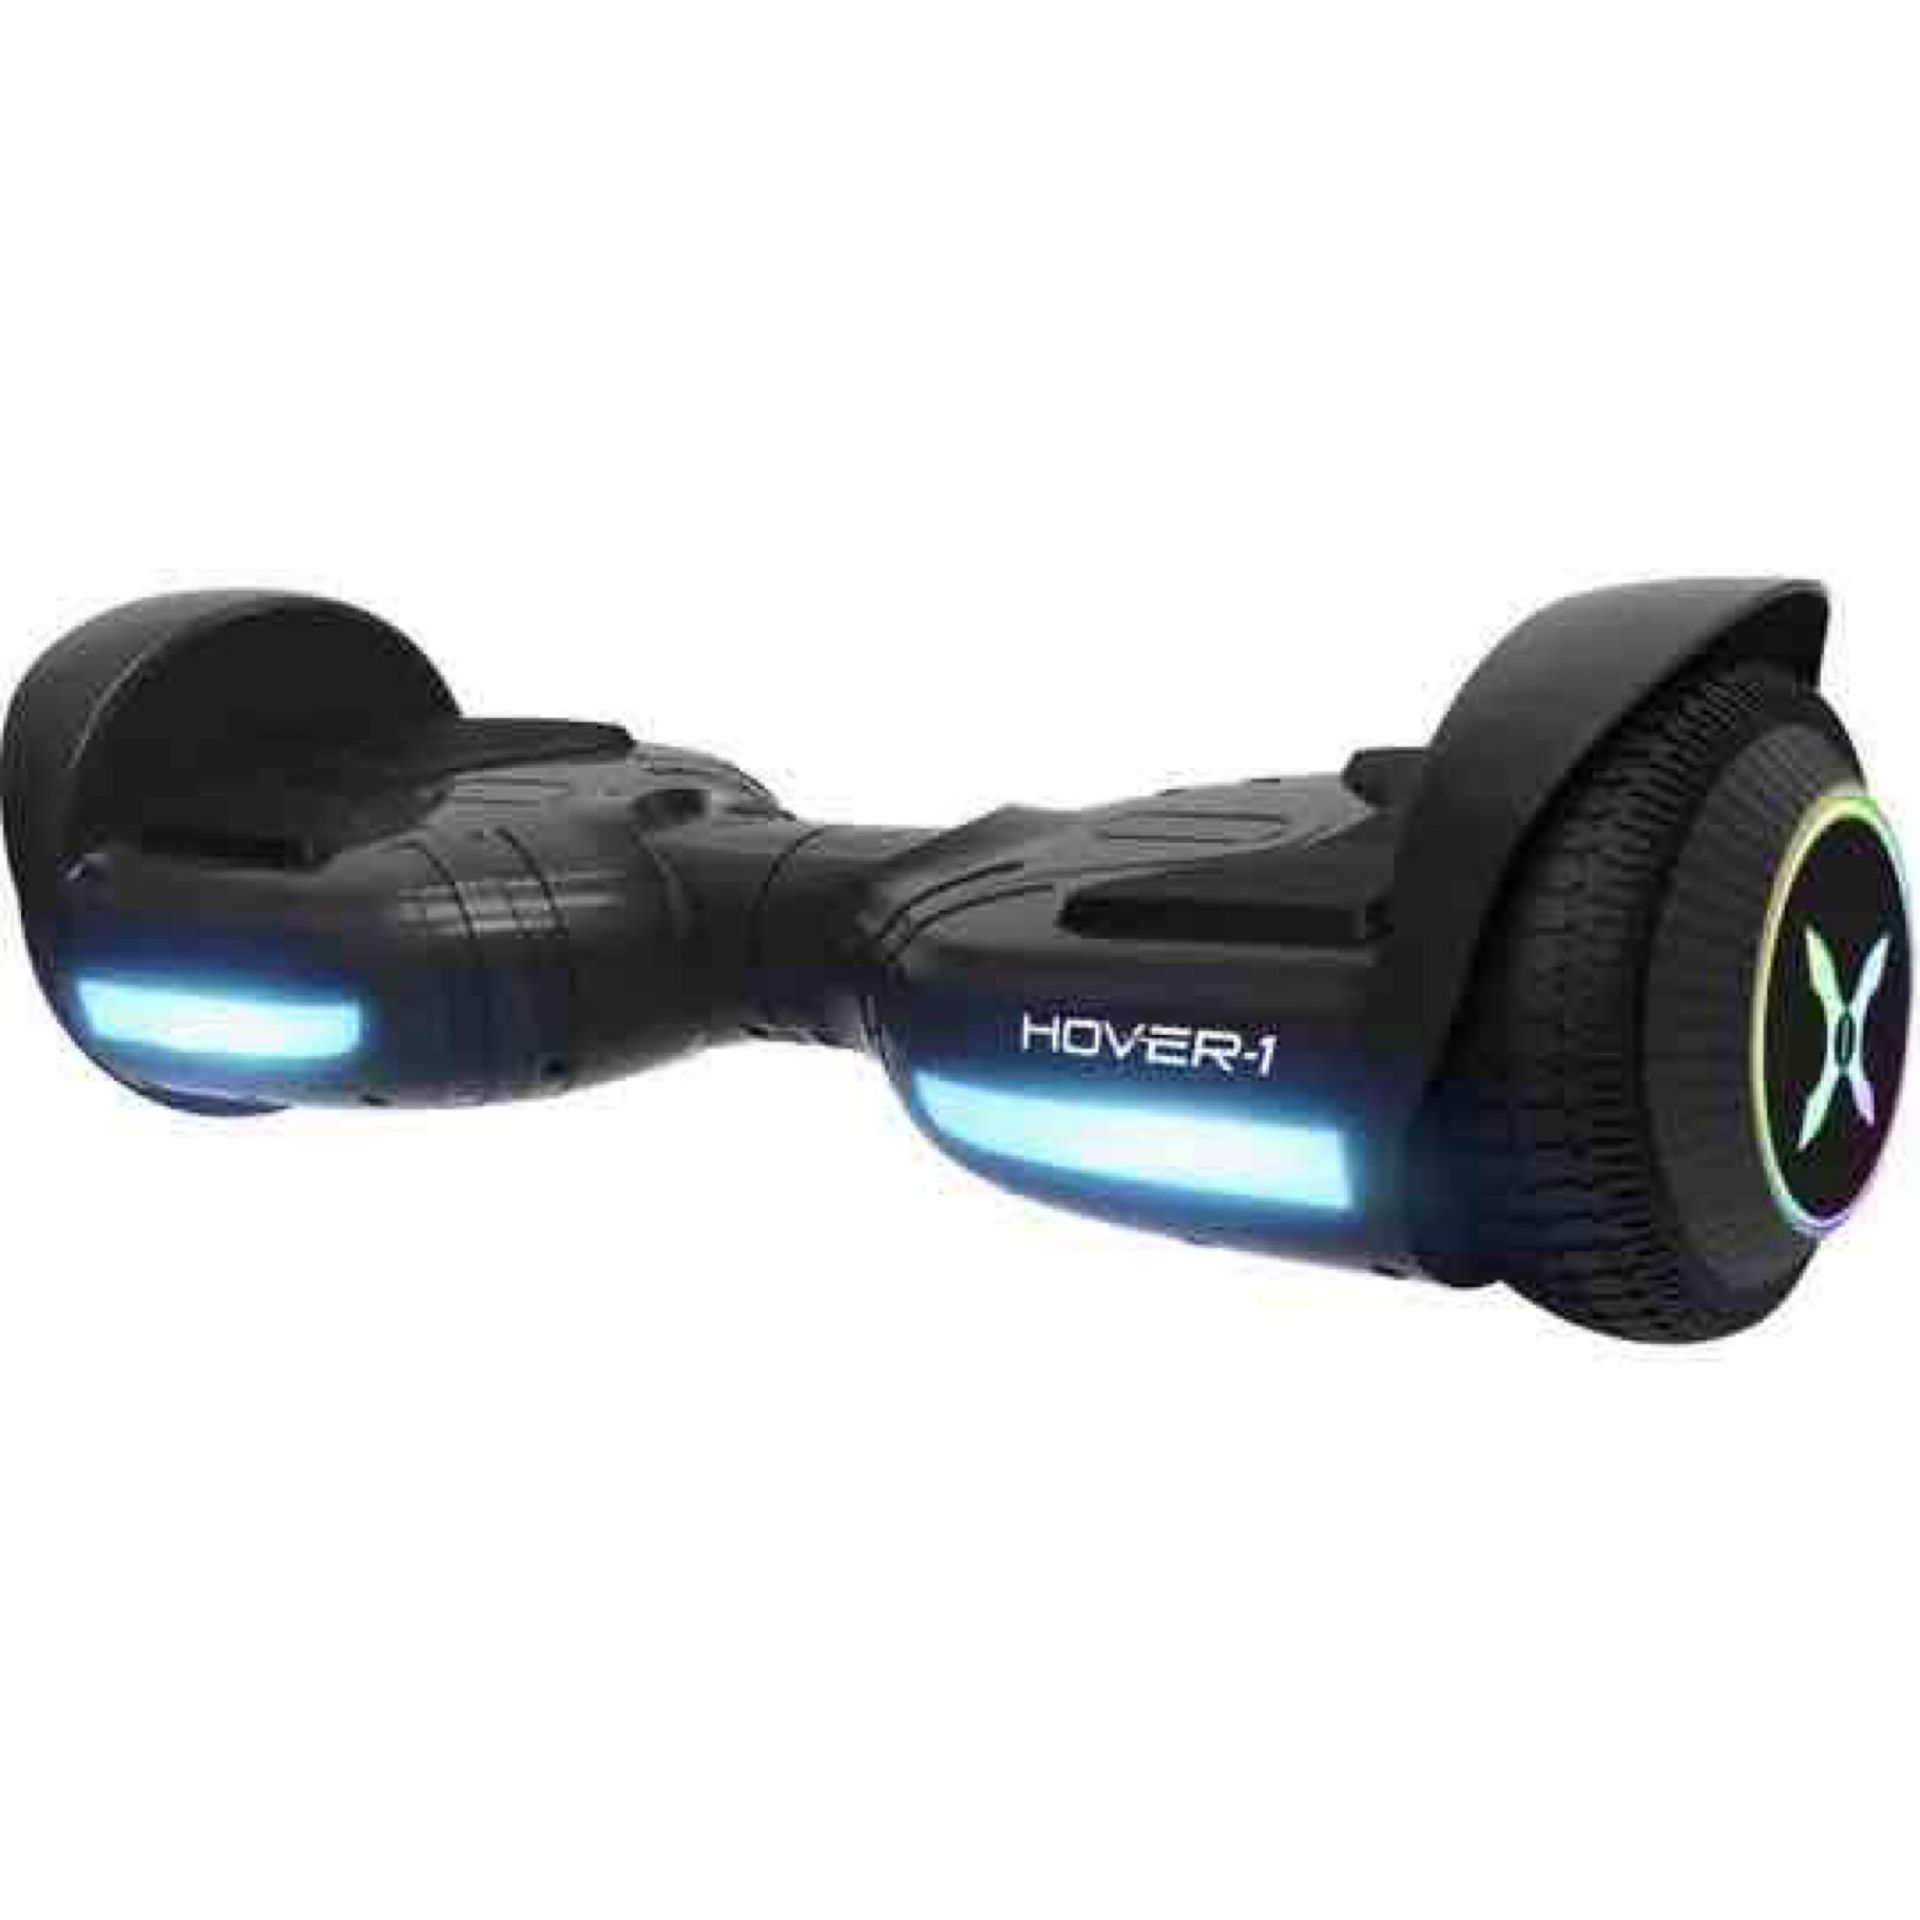 Hover-1 Hoverboard Electrical RRP £149.99